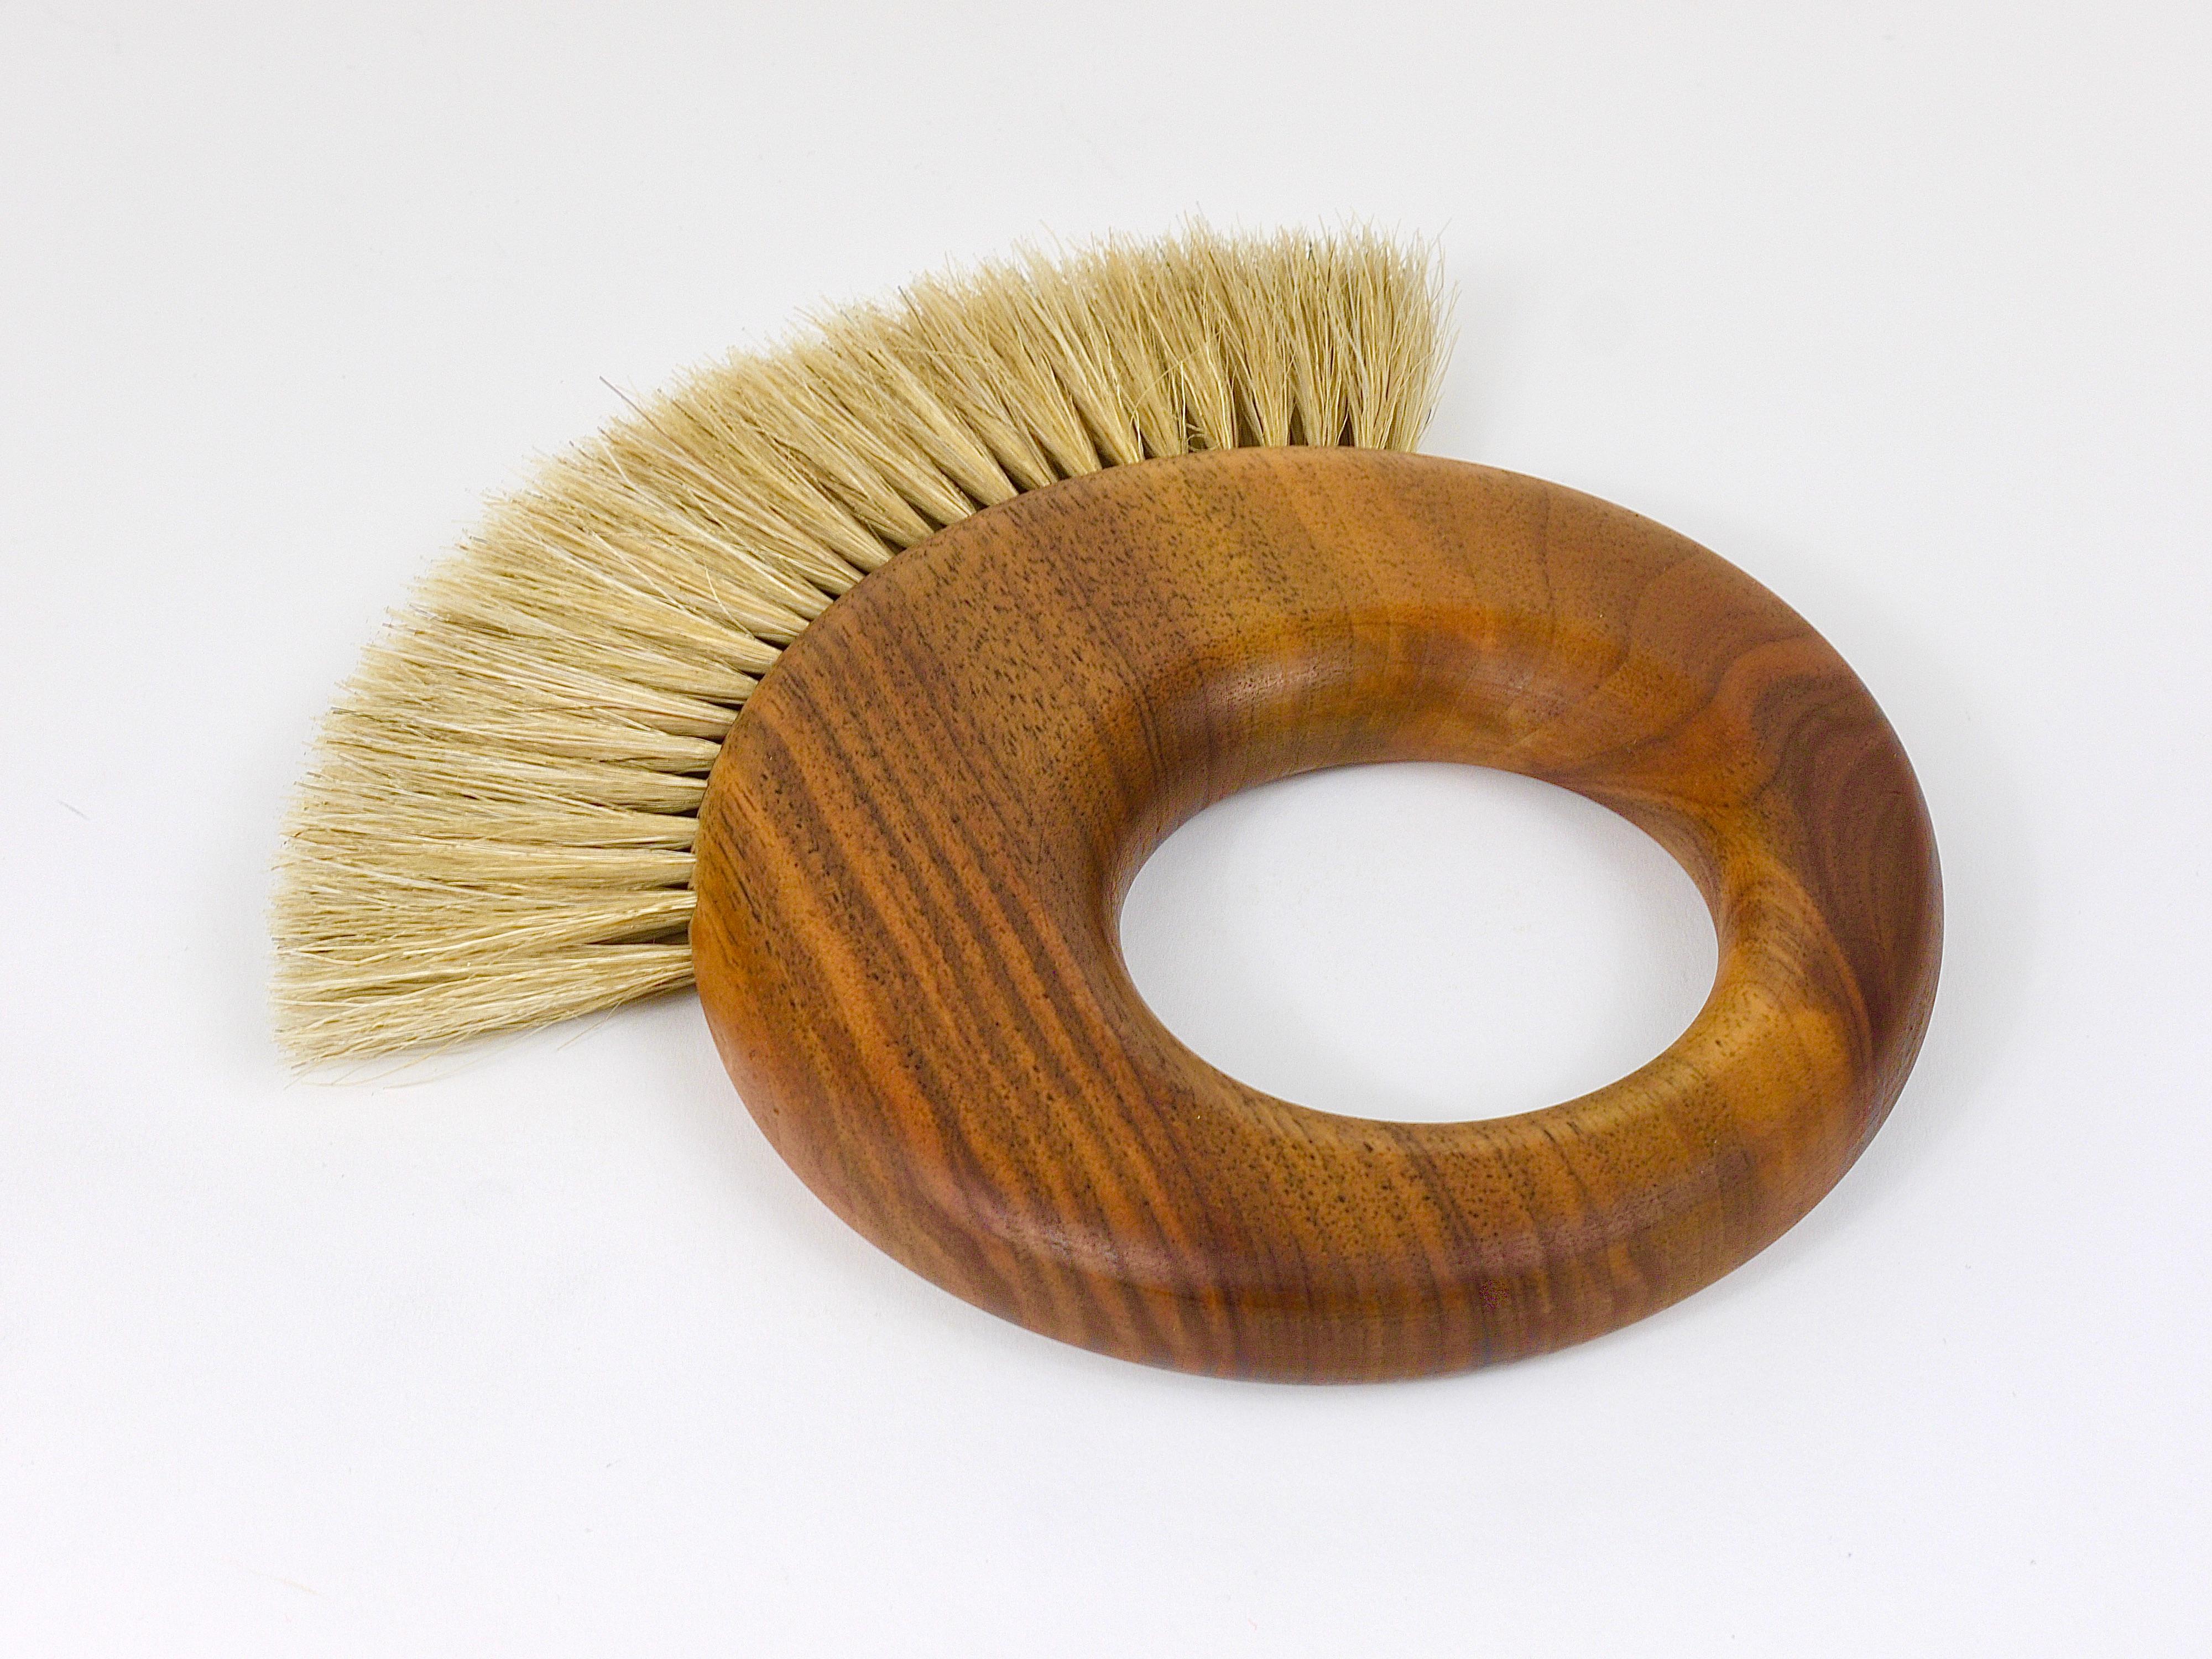 Large Carl Aubock Midcentury Walnut Ring Clothes Brush, Austria, 1950s For Sale 4